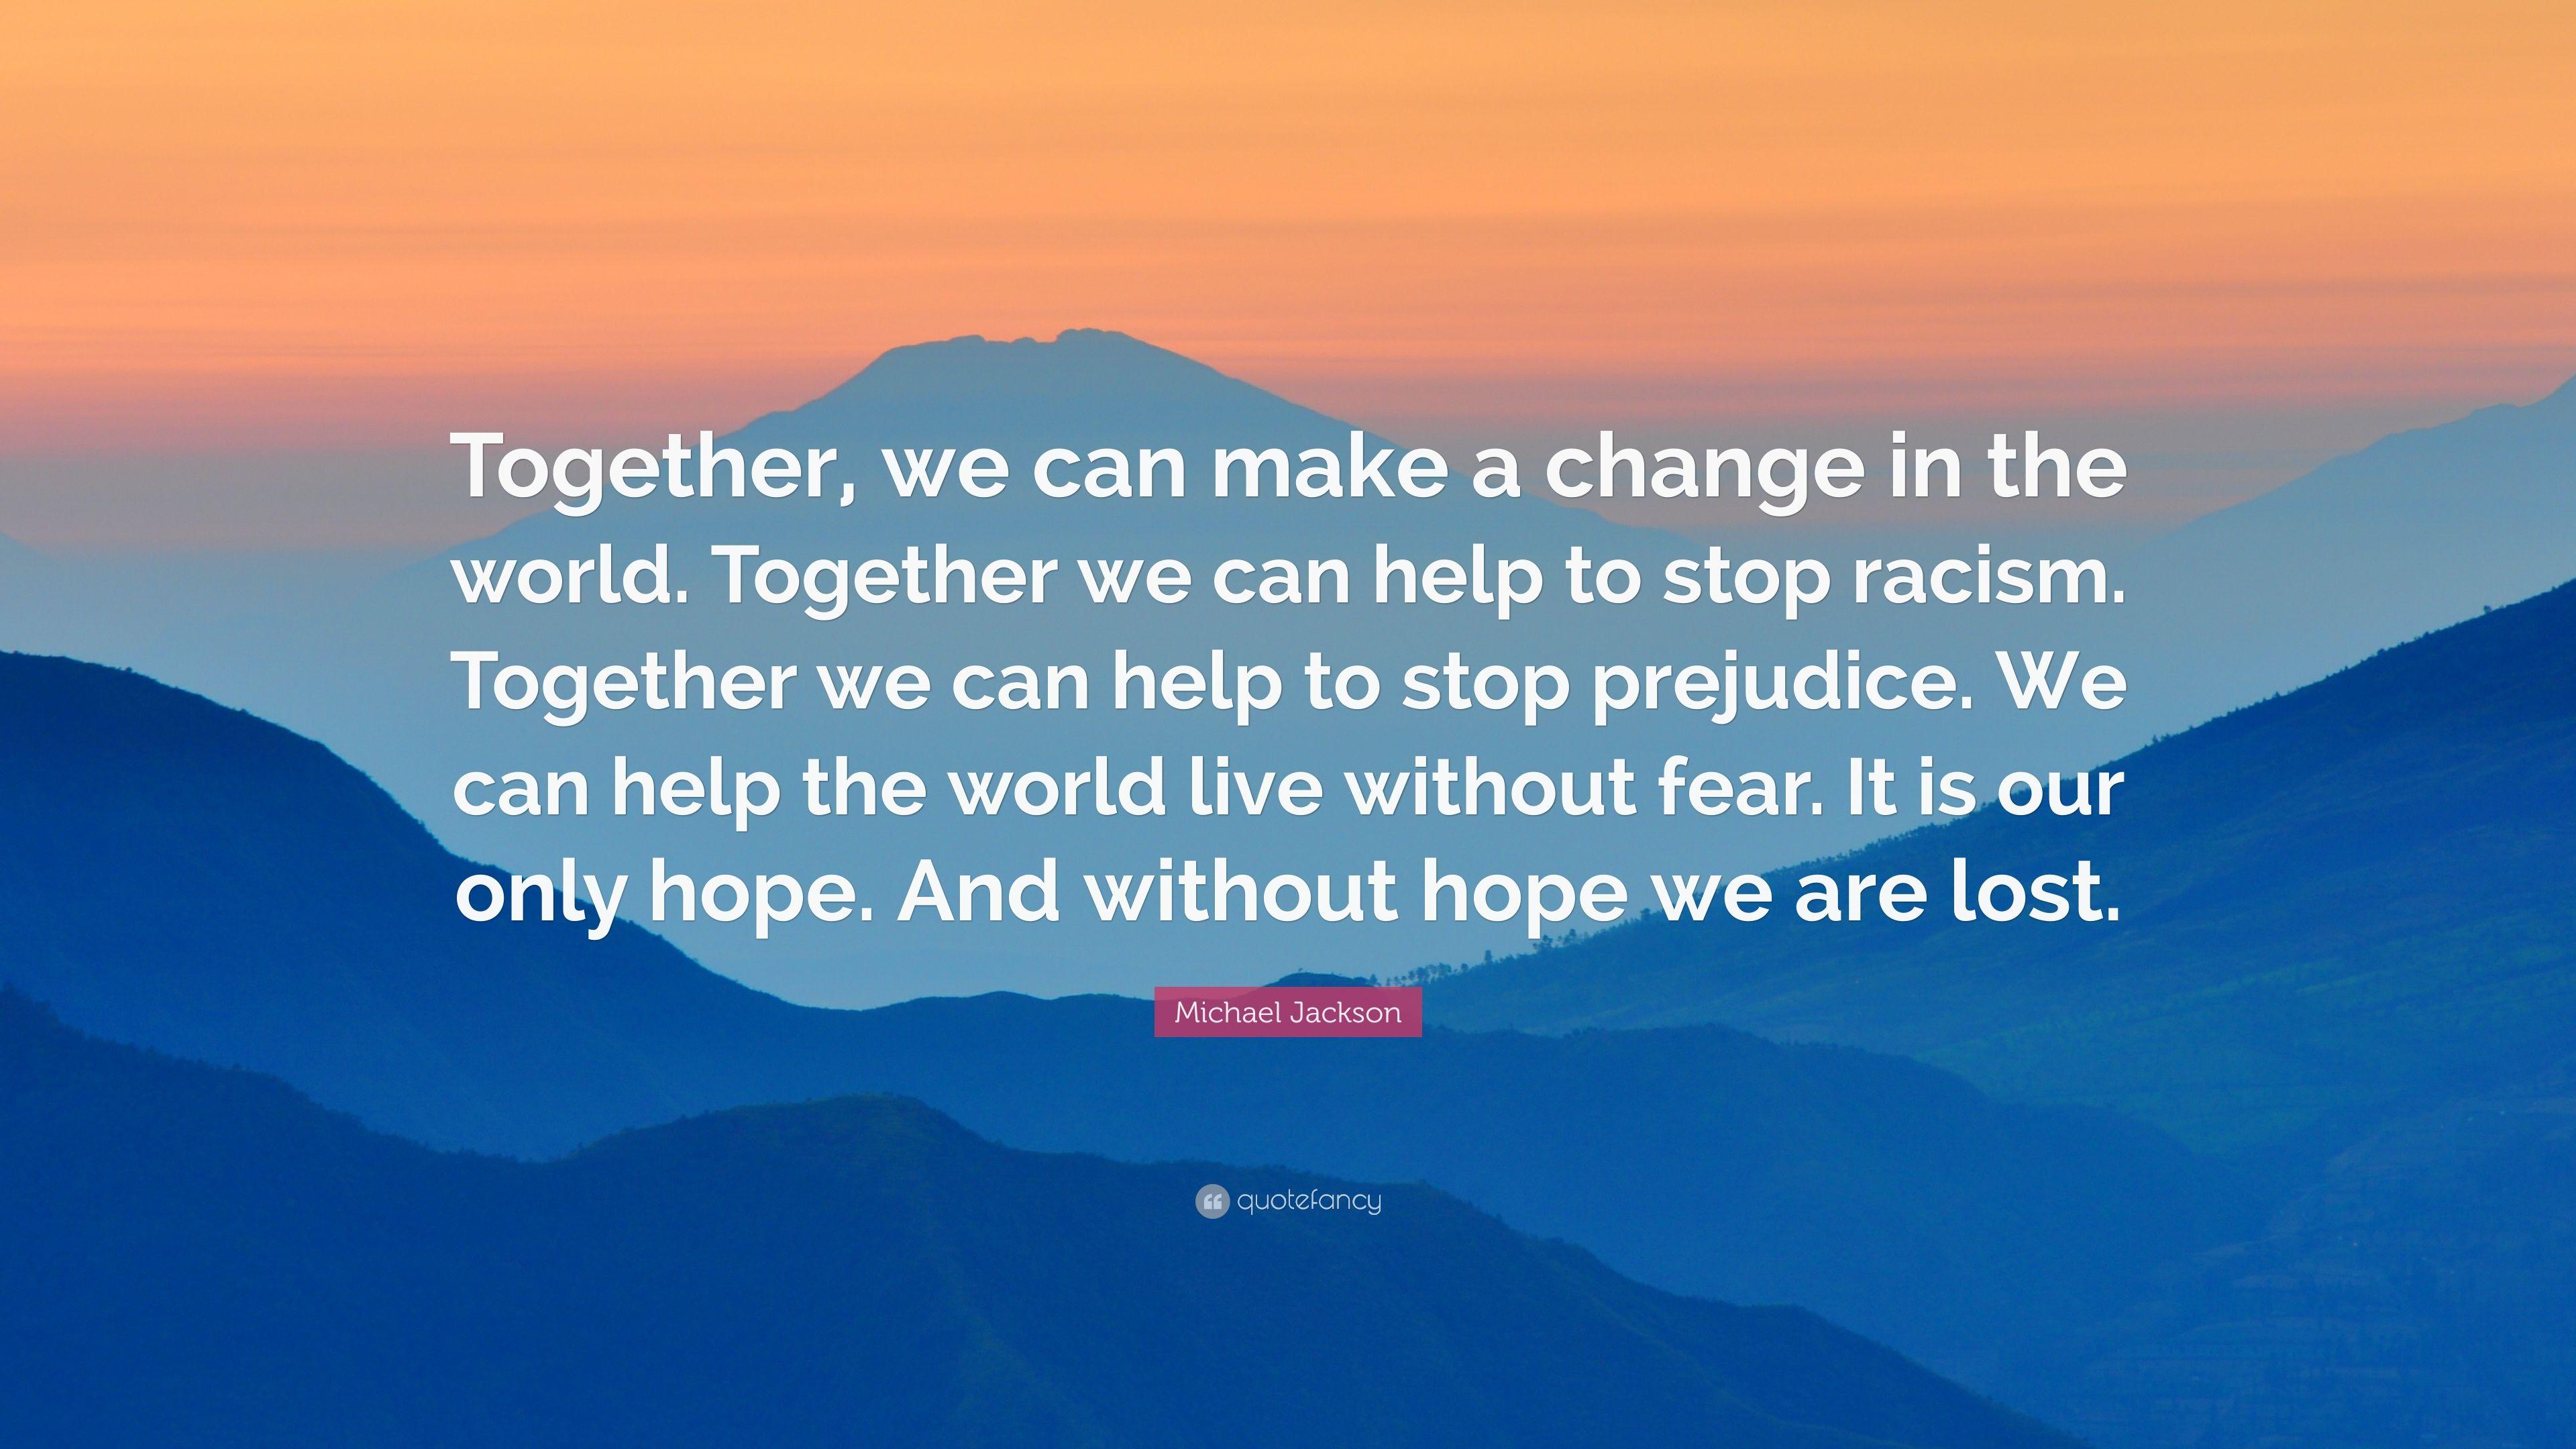 Michael Jackson Quote: “Together, we can make a change in the world